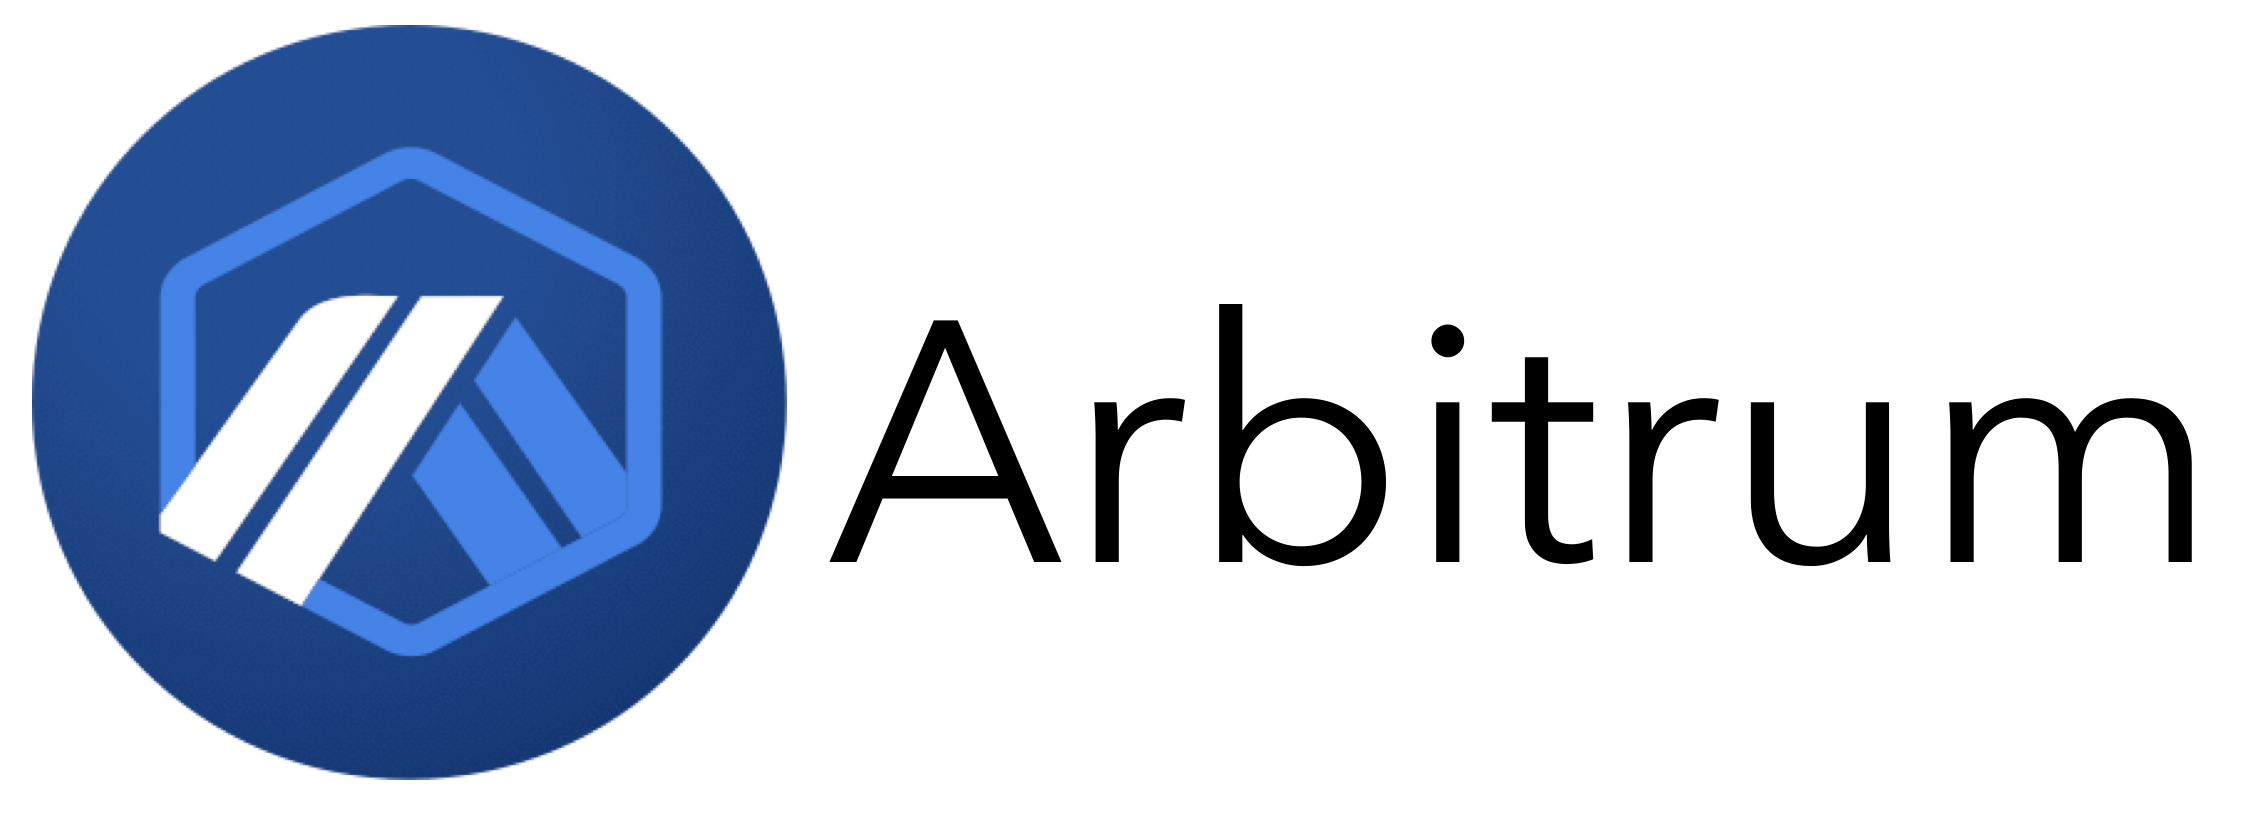 Arbitrum title with logo on the left